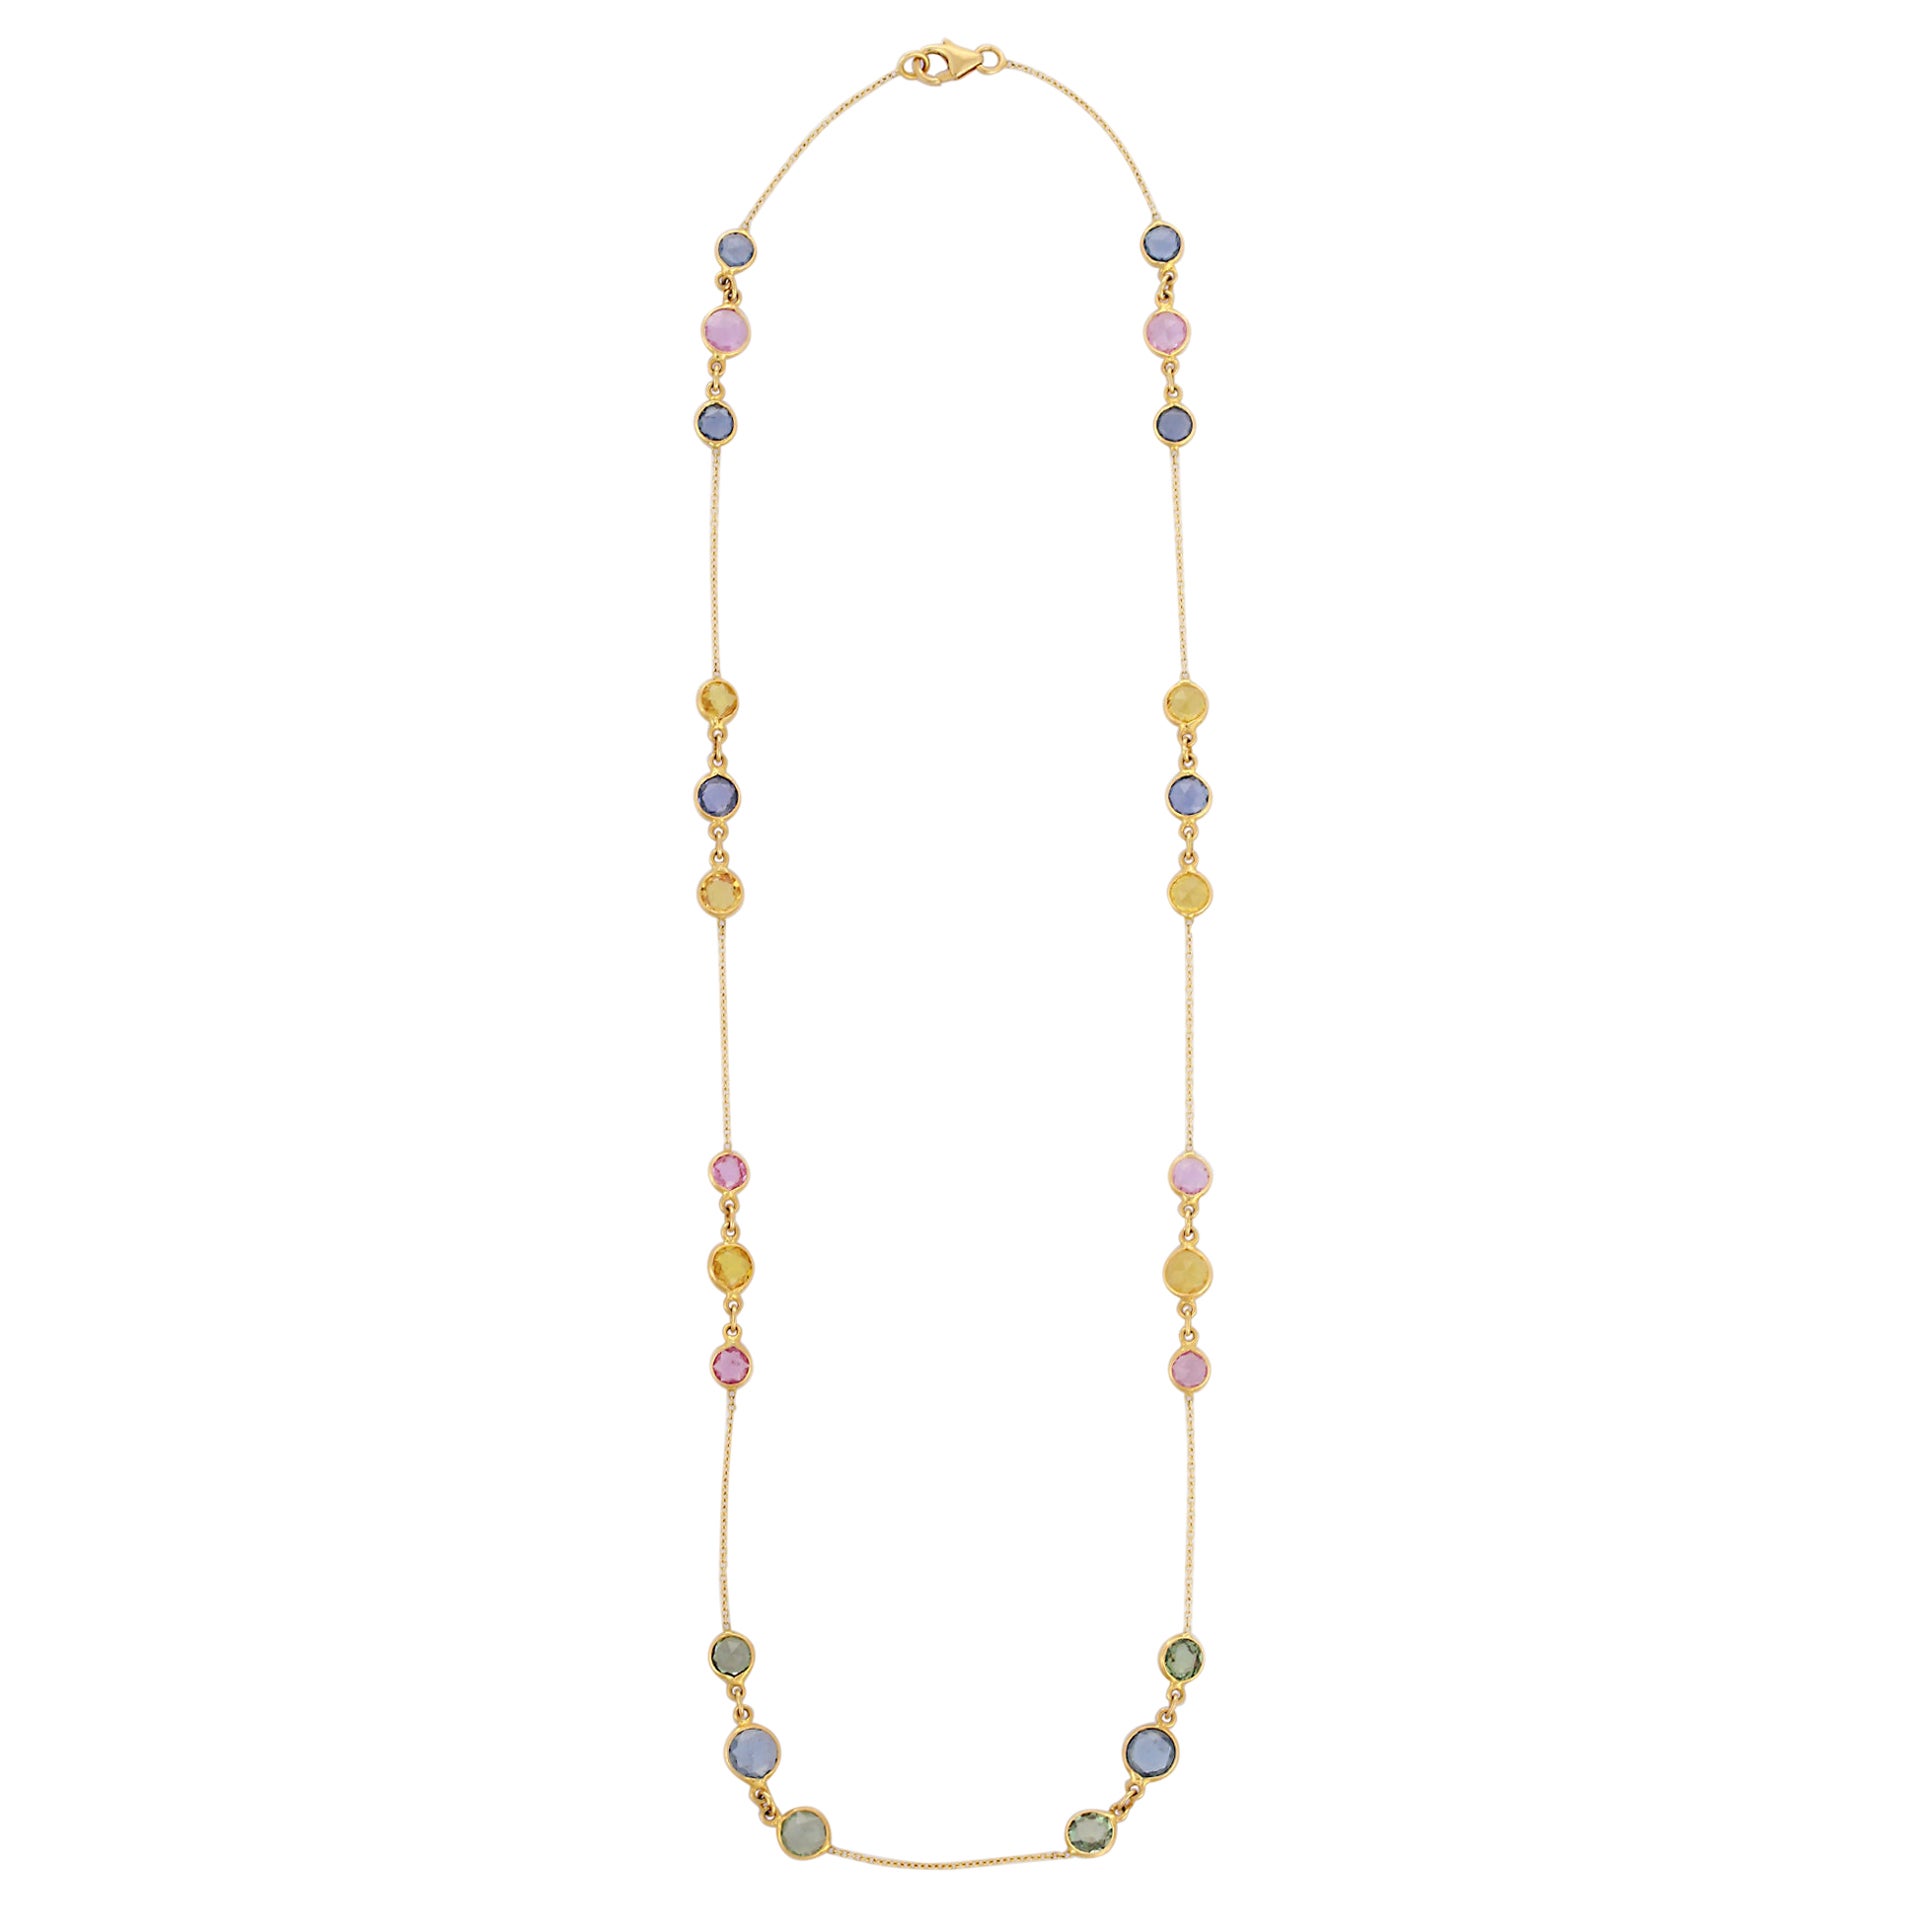 11.45 ct Multi Sapphire Chain Necklace Enhancer Necklace in 18K Yellow Gold